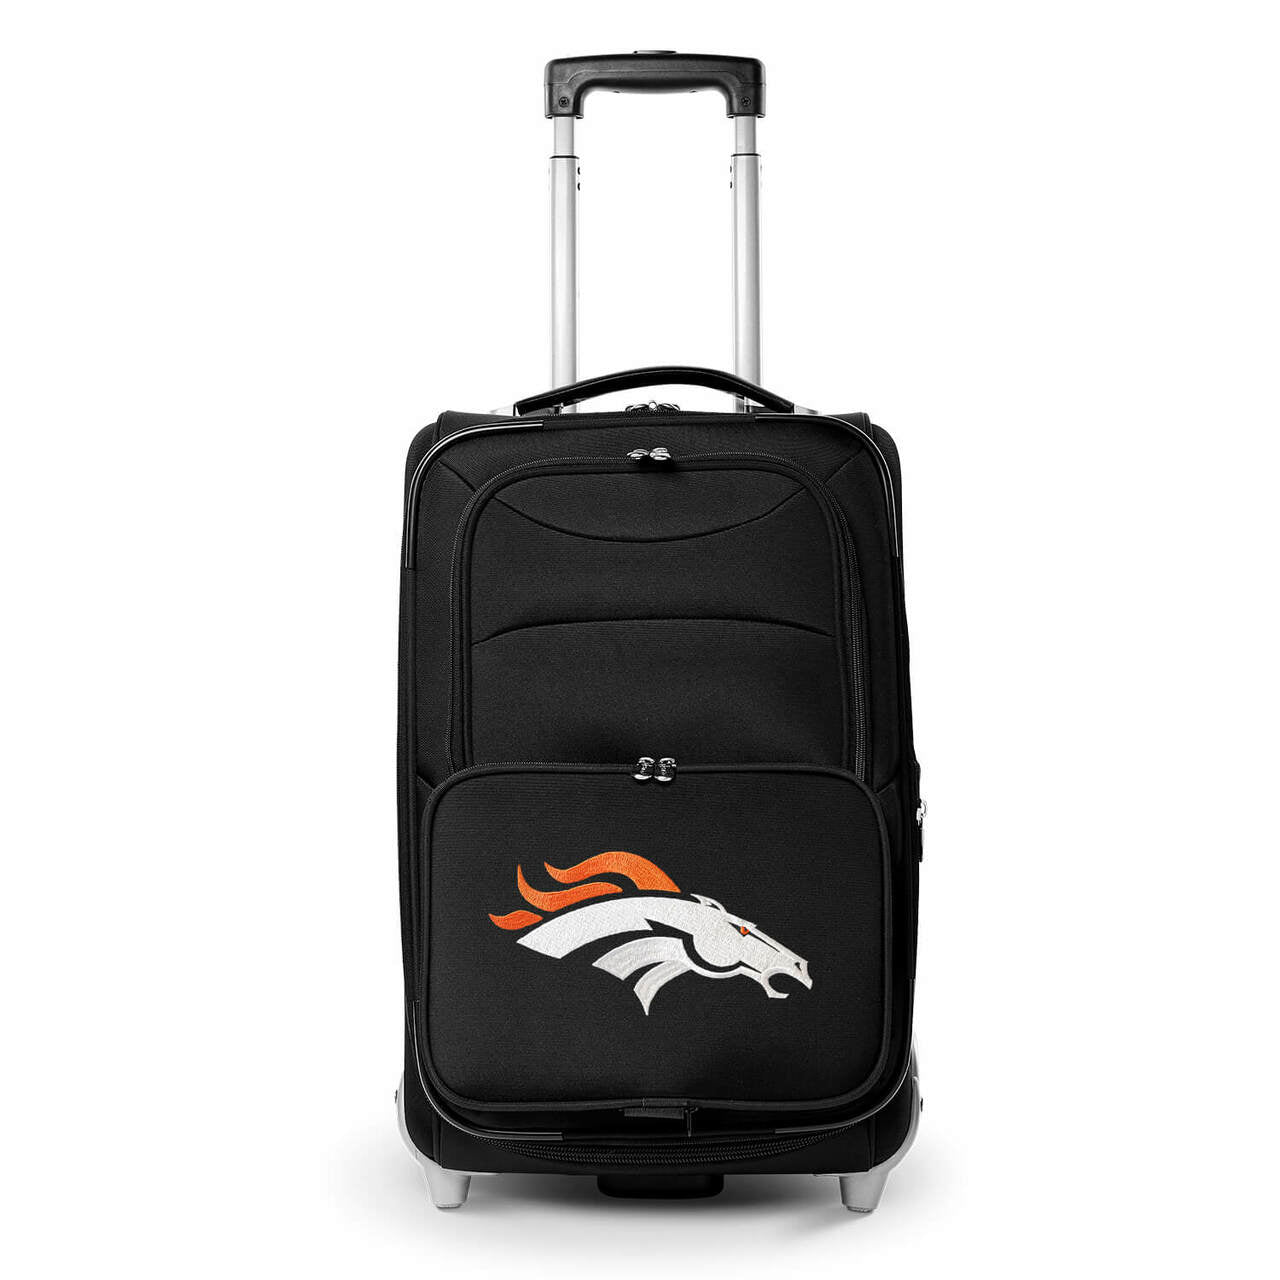 Broncos Carry On Luggage | Denver Broncos Rolling Carry On Luggage